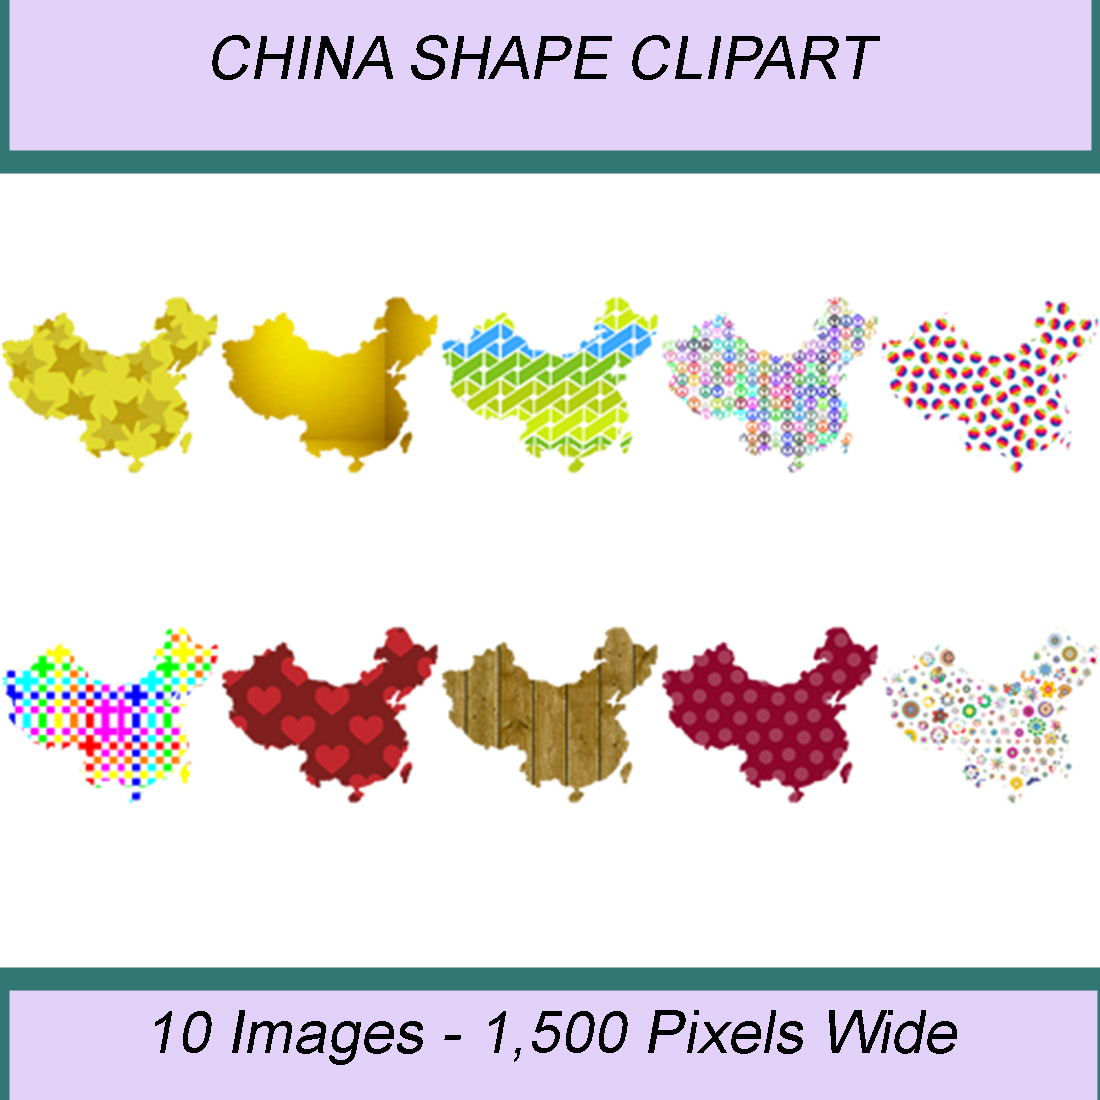 CHINA SHAPE CLIPART ICONS cover image.